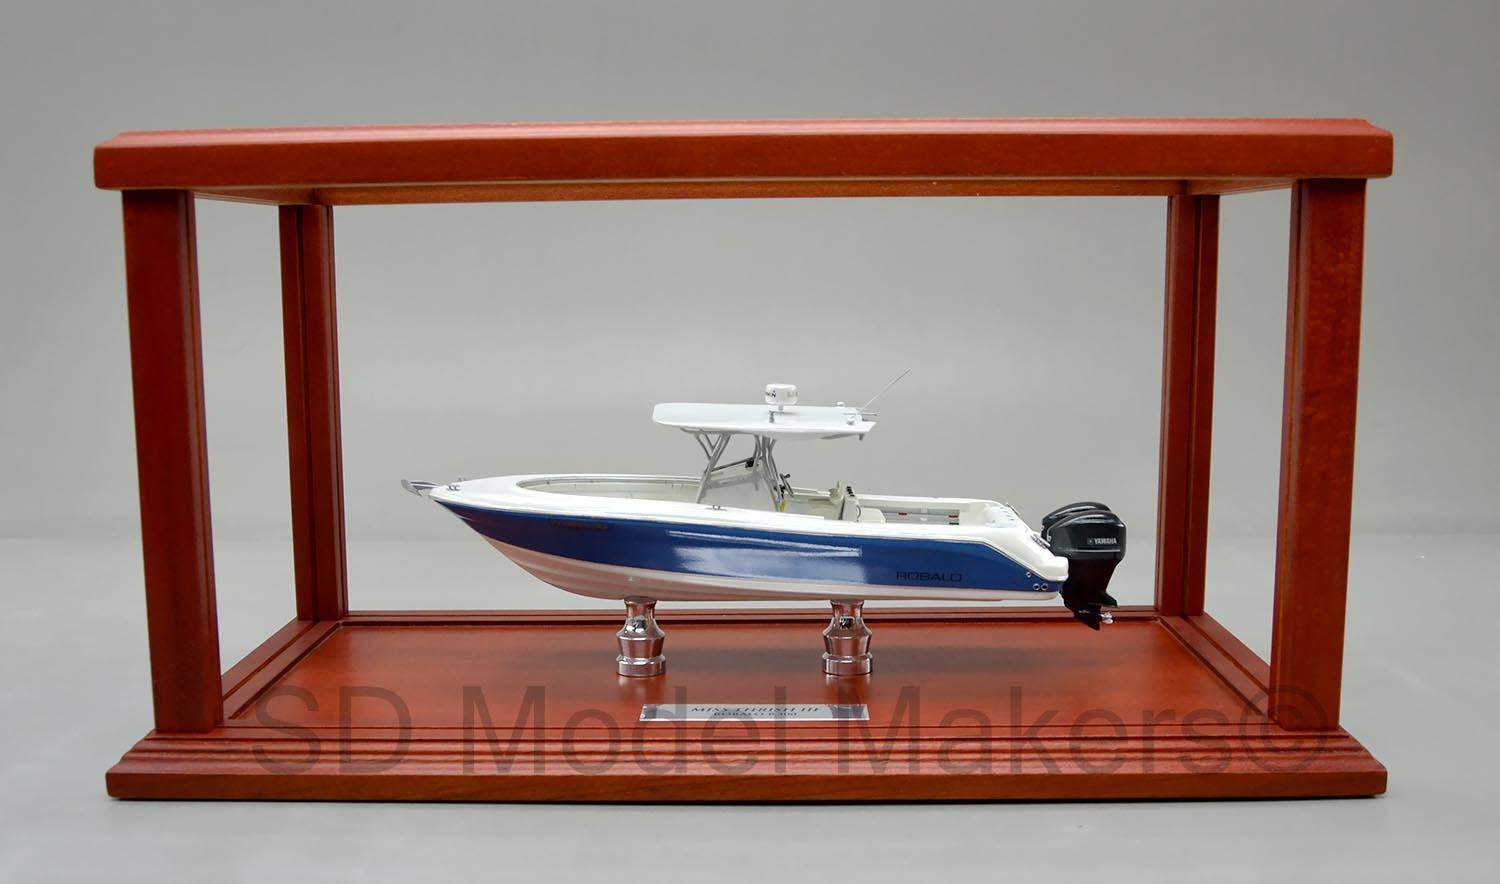 diecast boats